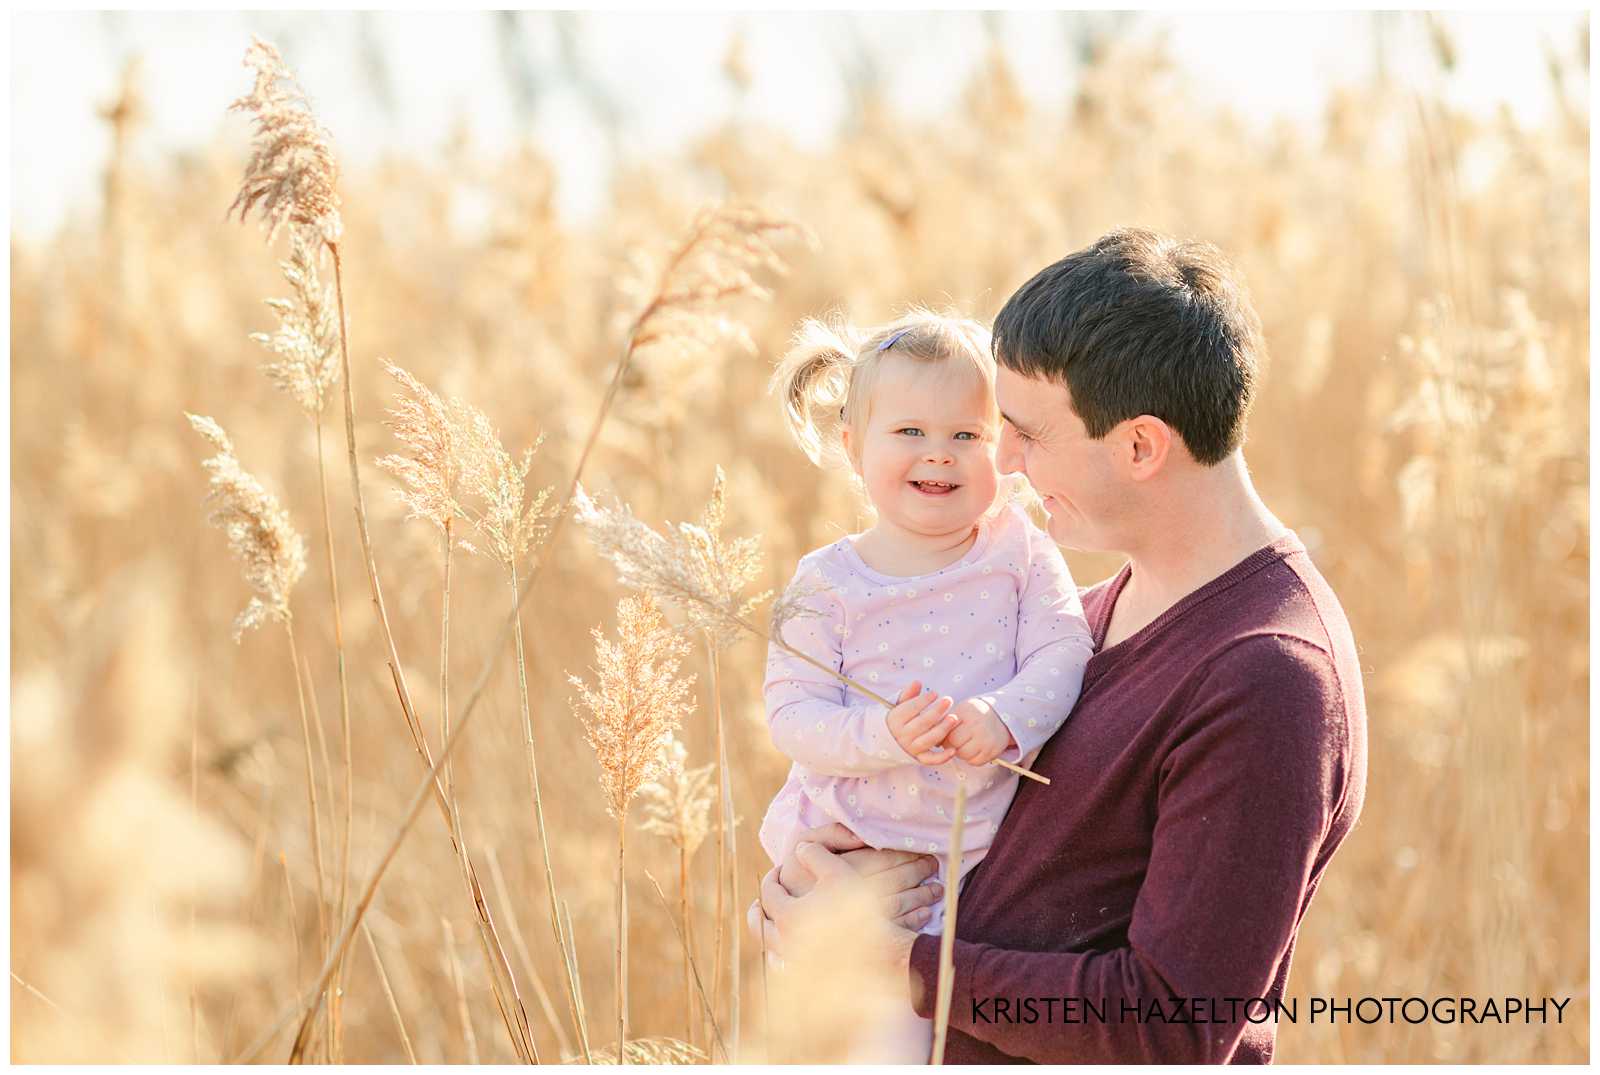 Dad and two-year old daughter in a field of yellow grasses in Forest Park, IL